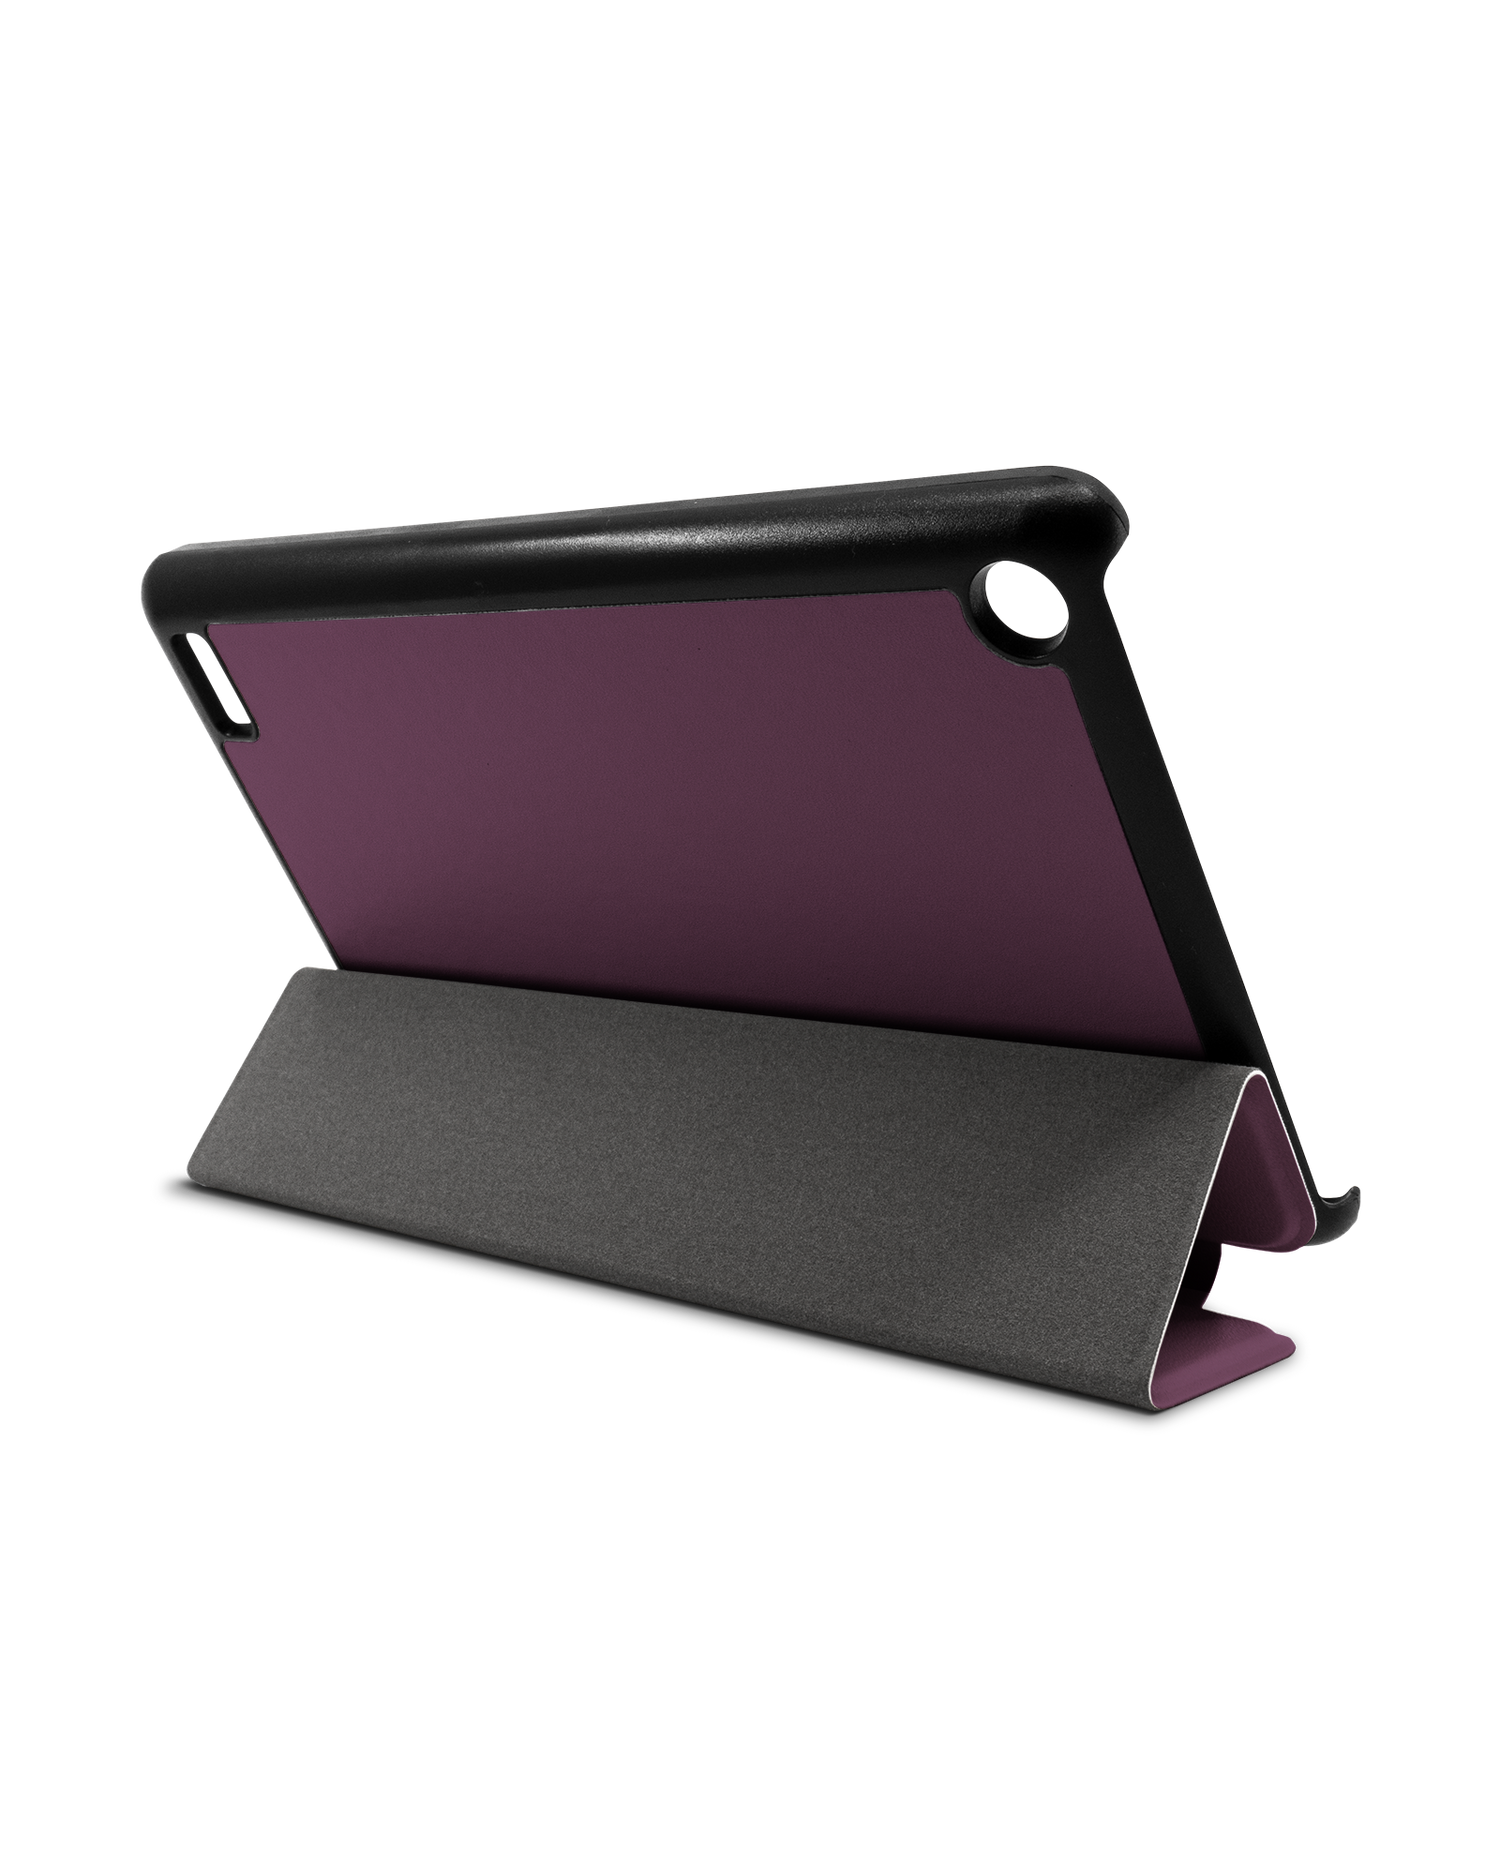 PLUM Tablet Smart Case for Amazon Fire 7: Used as Stand